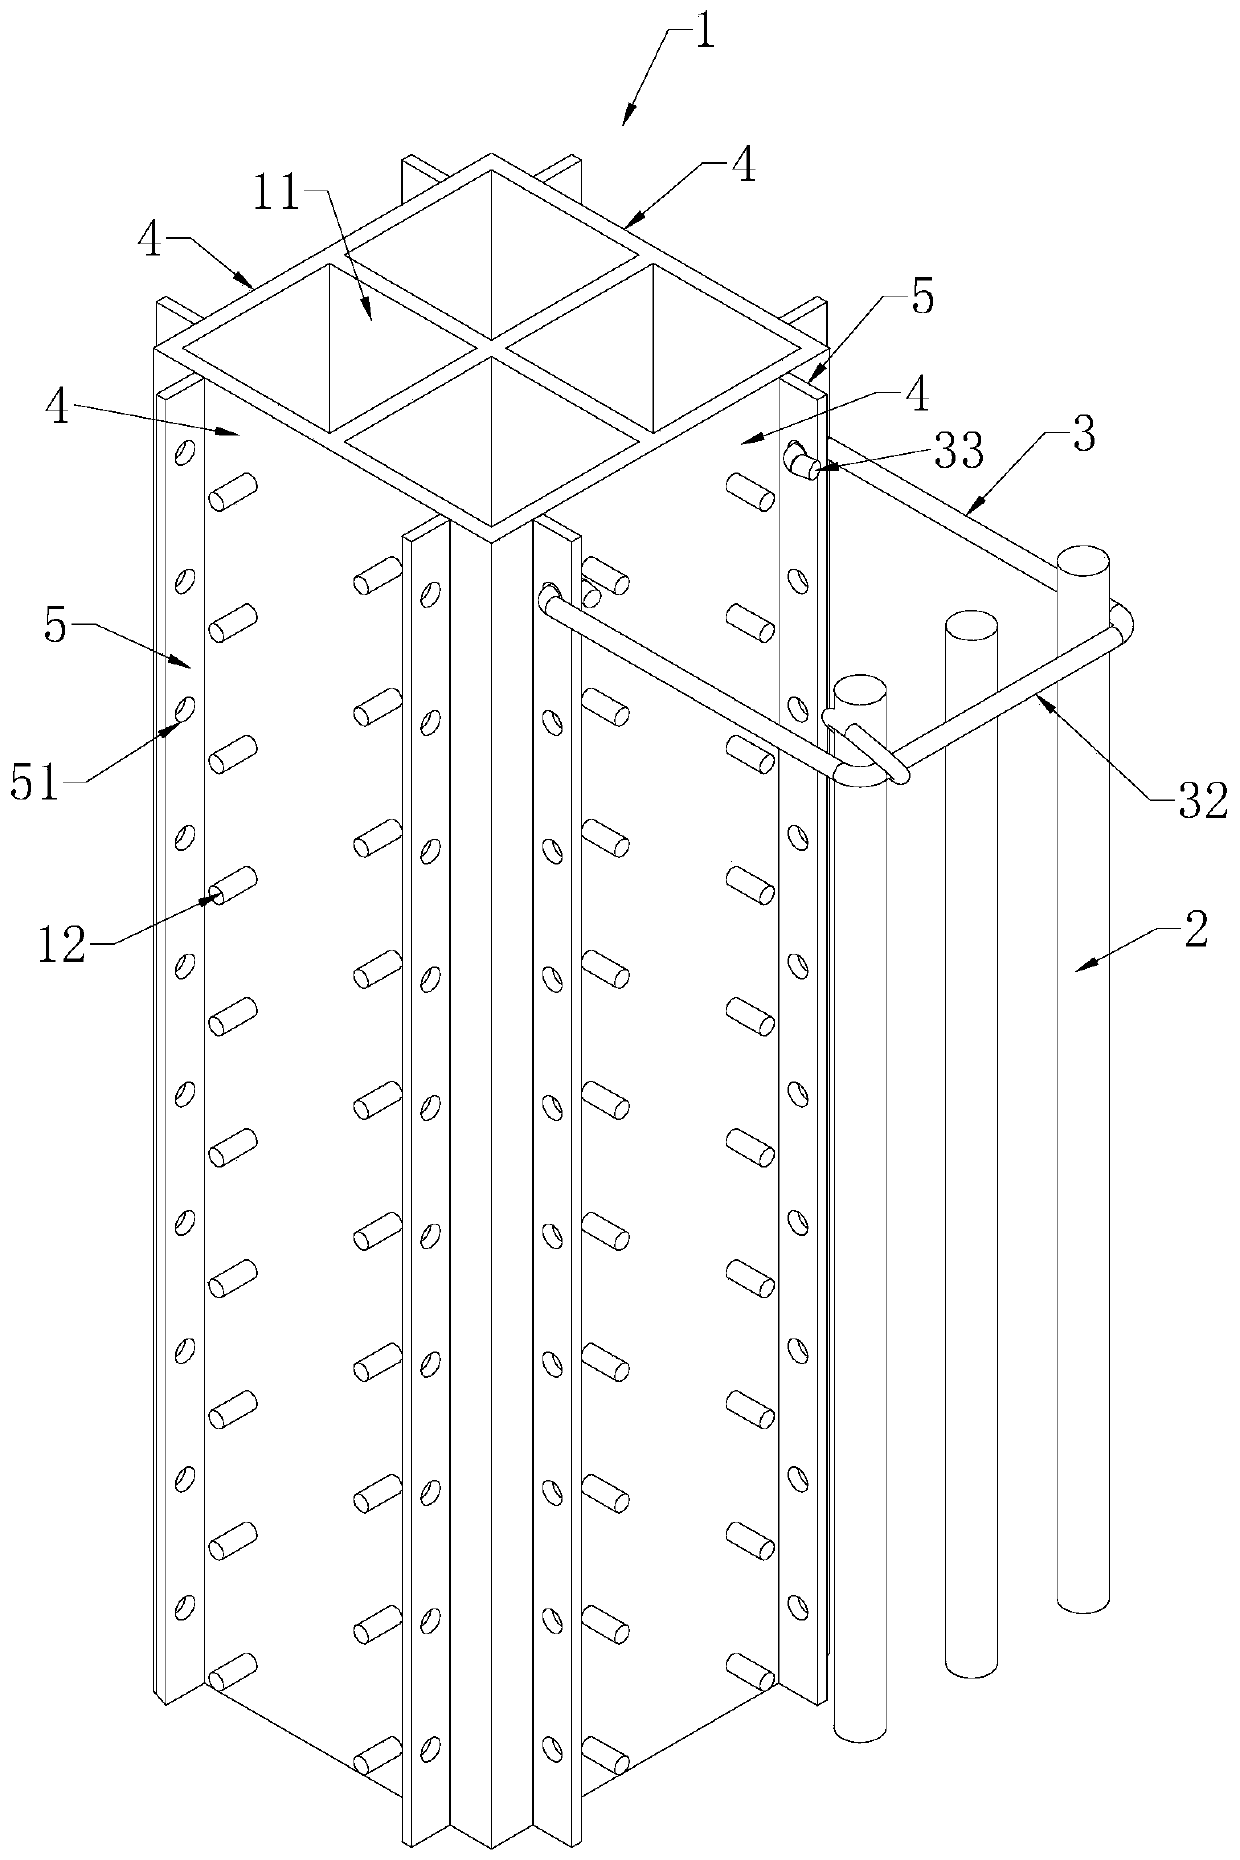 Connecting structure and construction method of steel ribs and hoops of steel rib concrete structure column